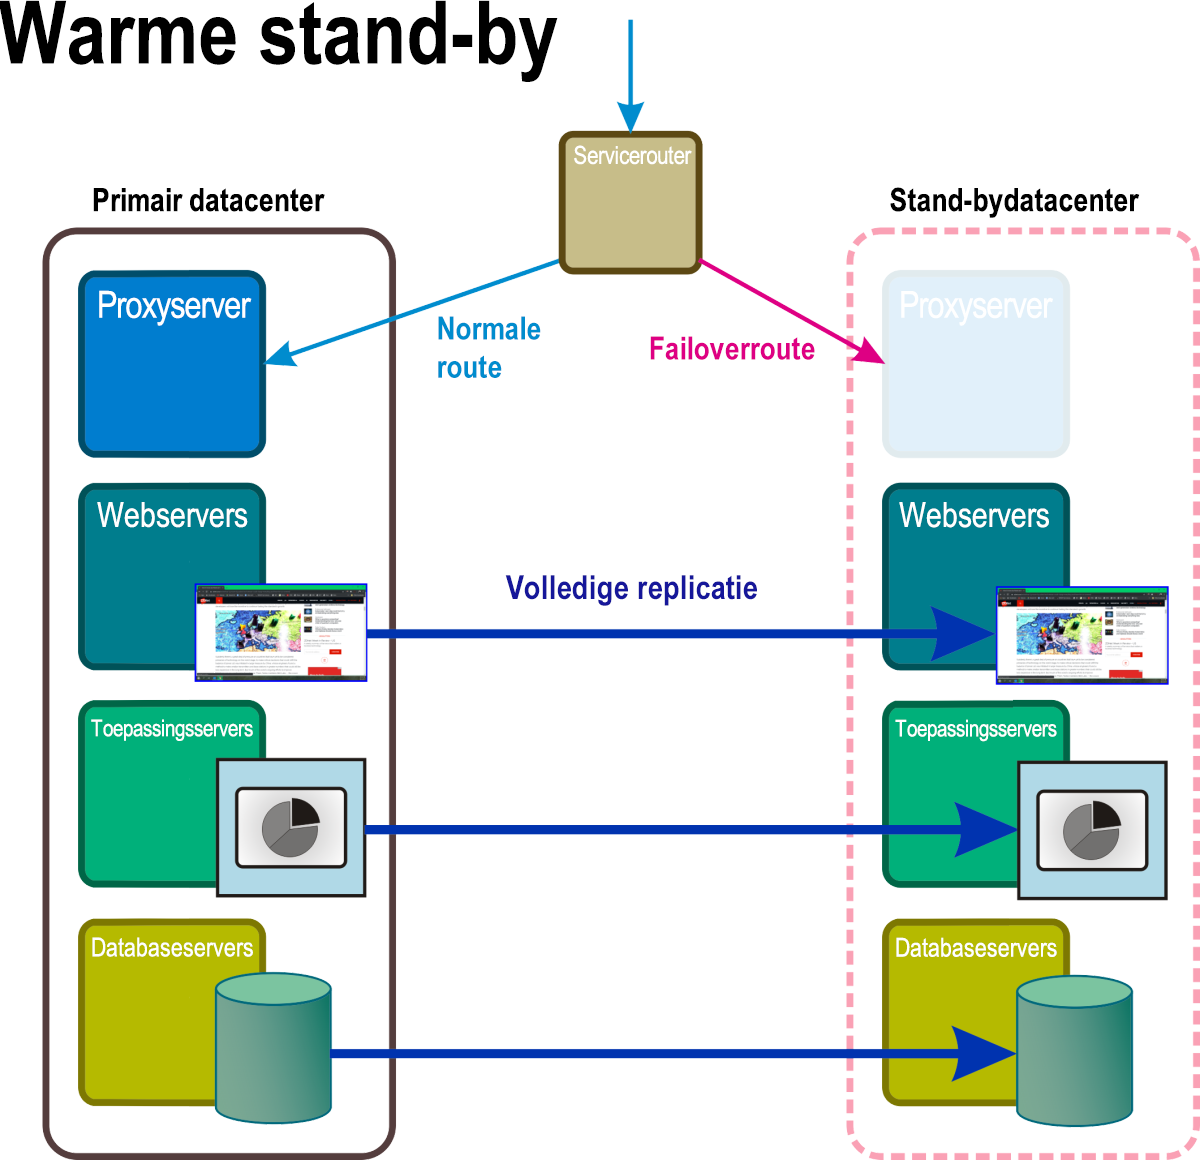 Figure 6: A Warm standby recovery scenario with some components in the standby namespace fully operational.